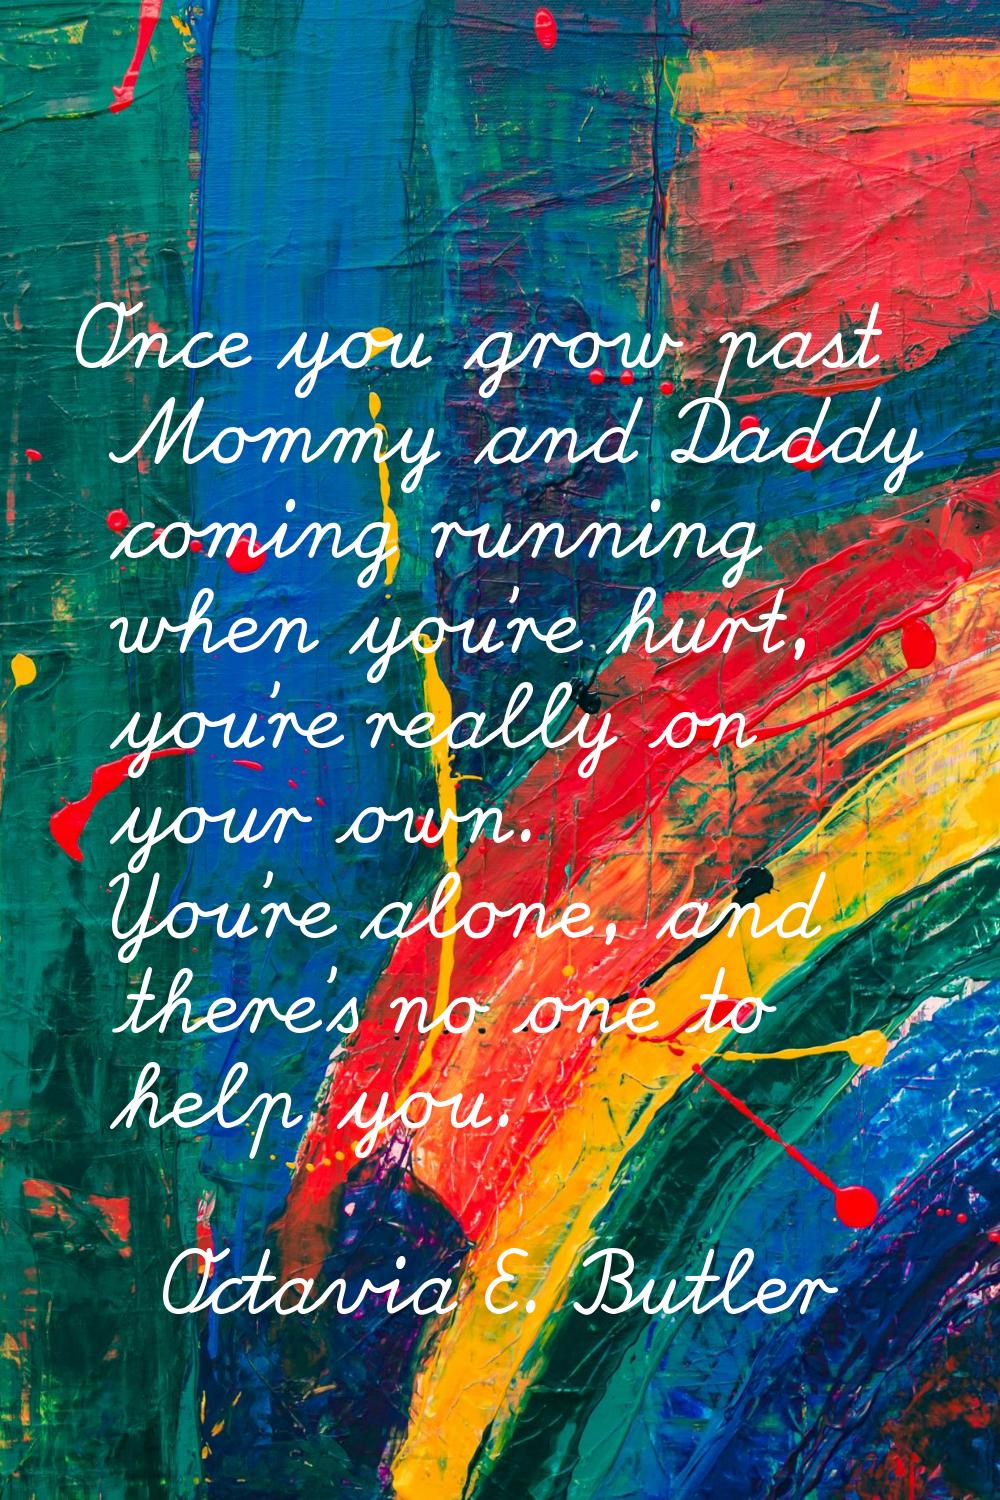 Once you grow past Mommy and Daddy coming running when you're hurt, you're really on your own. You'